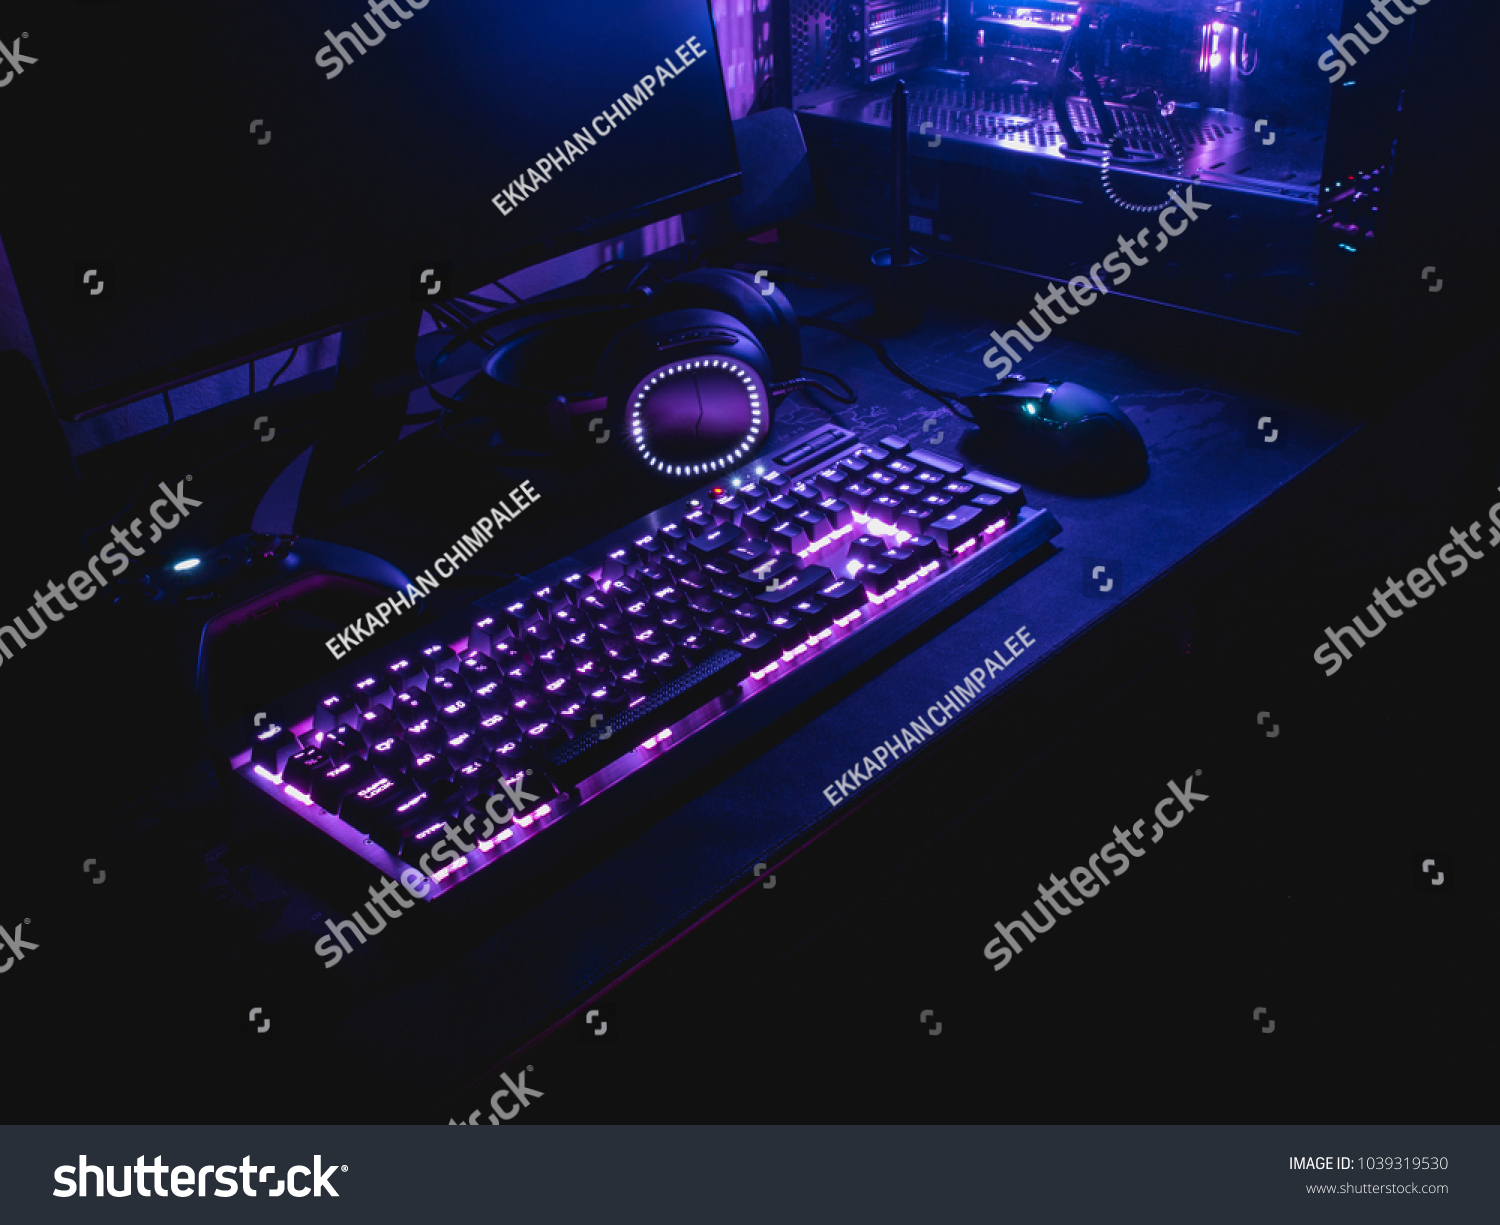 gamer workspace concept, top view a gaming gear, mouse, keyboard with RGB Color, joystick, headset, webcam, VR Headset on black table background. #1039319530